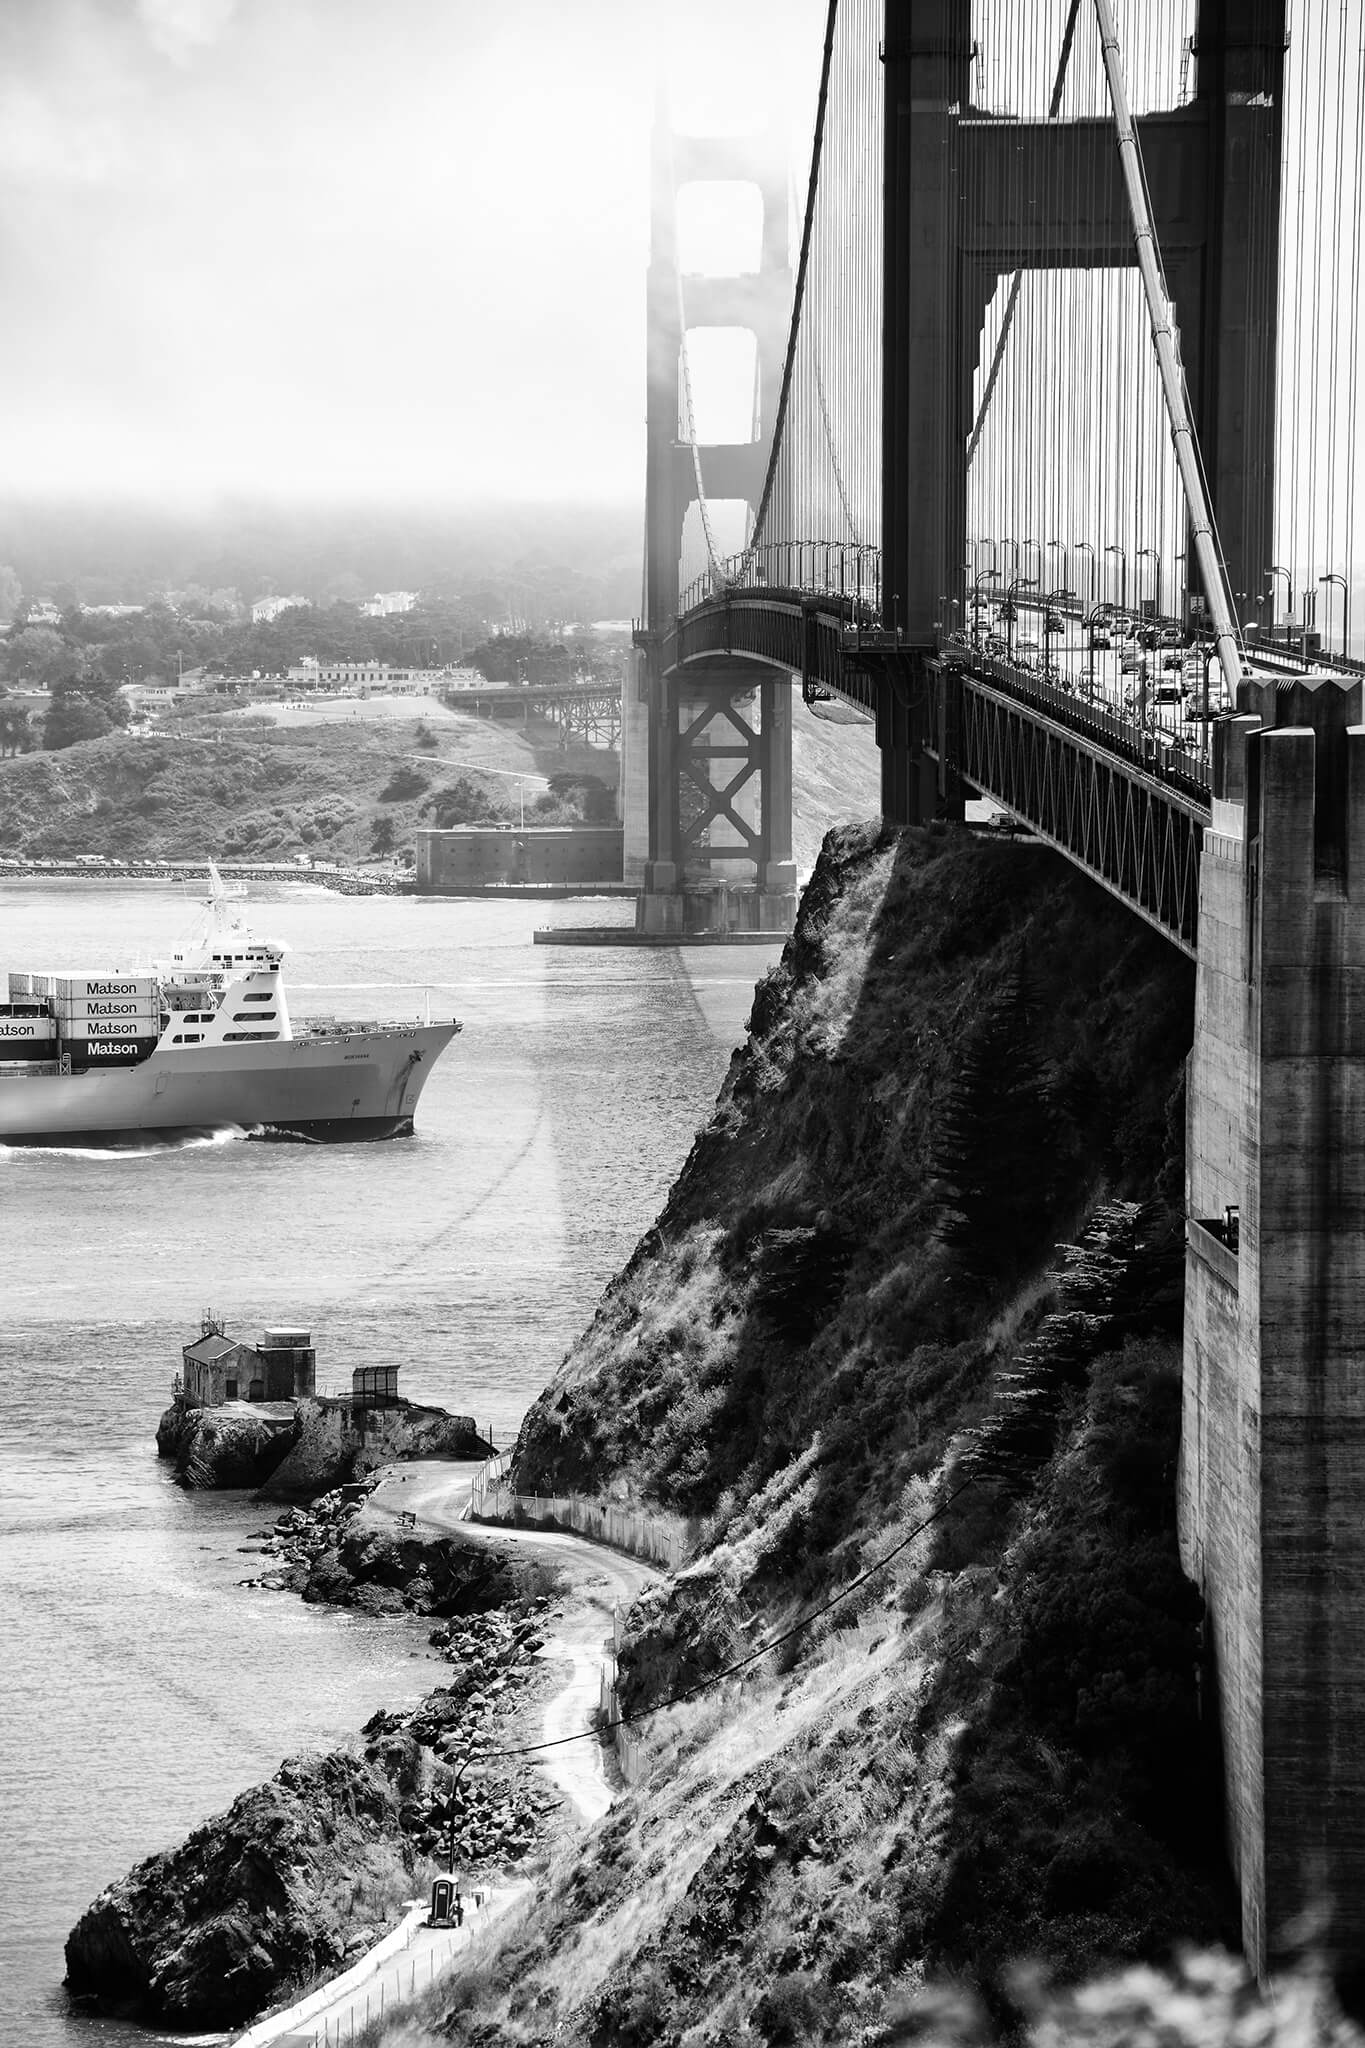 Traffic and Ship by Golden Gate